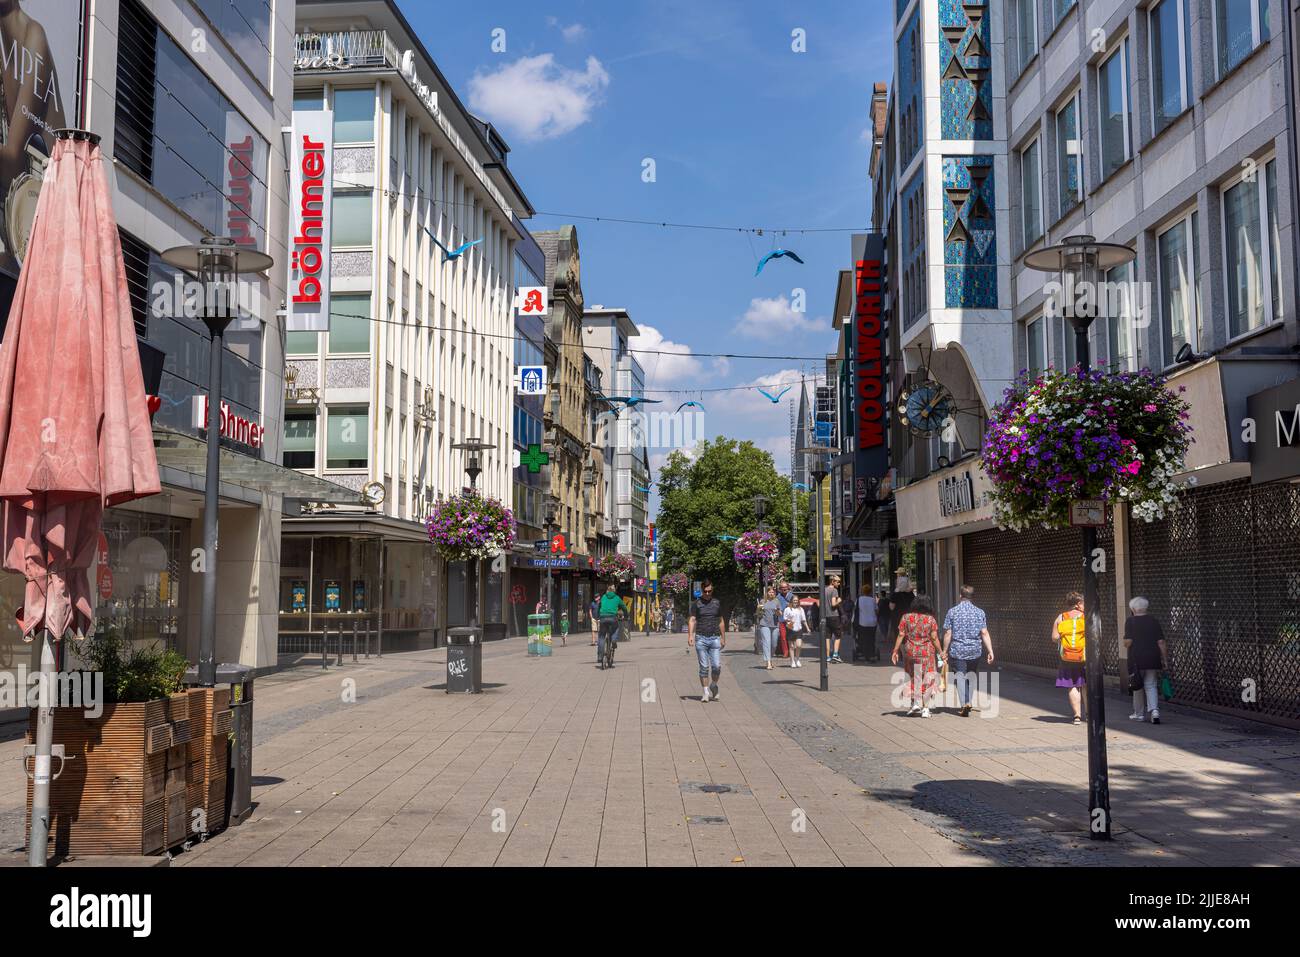 Vivid architecture of Essen, Germany, on a bright summer day Stock Photo